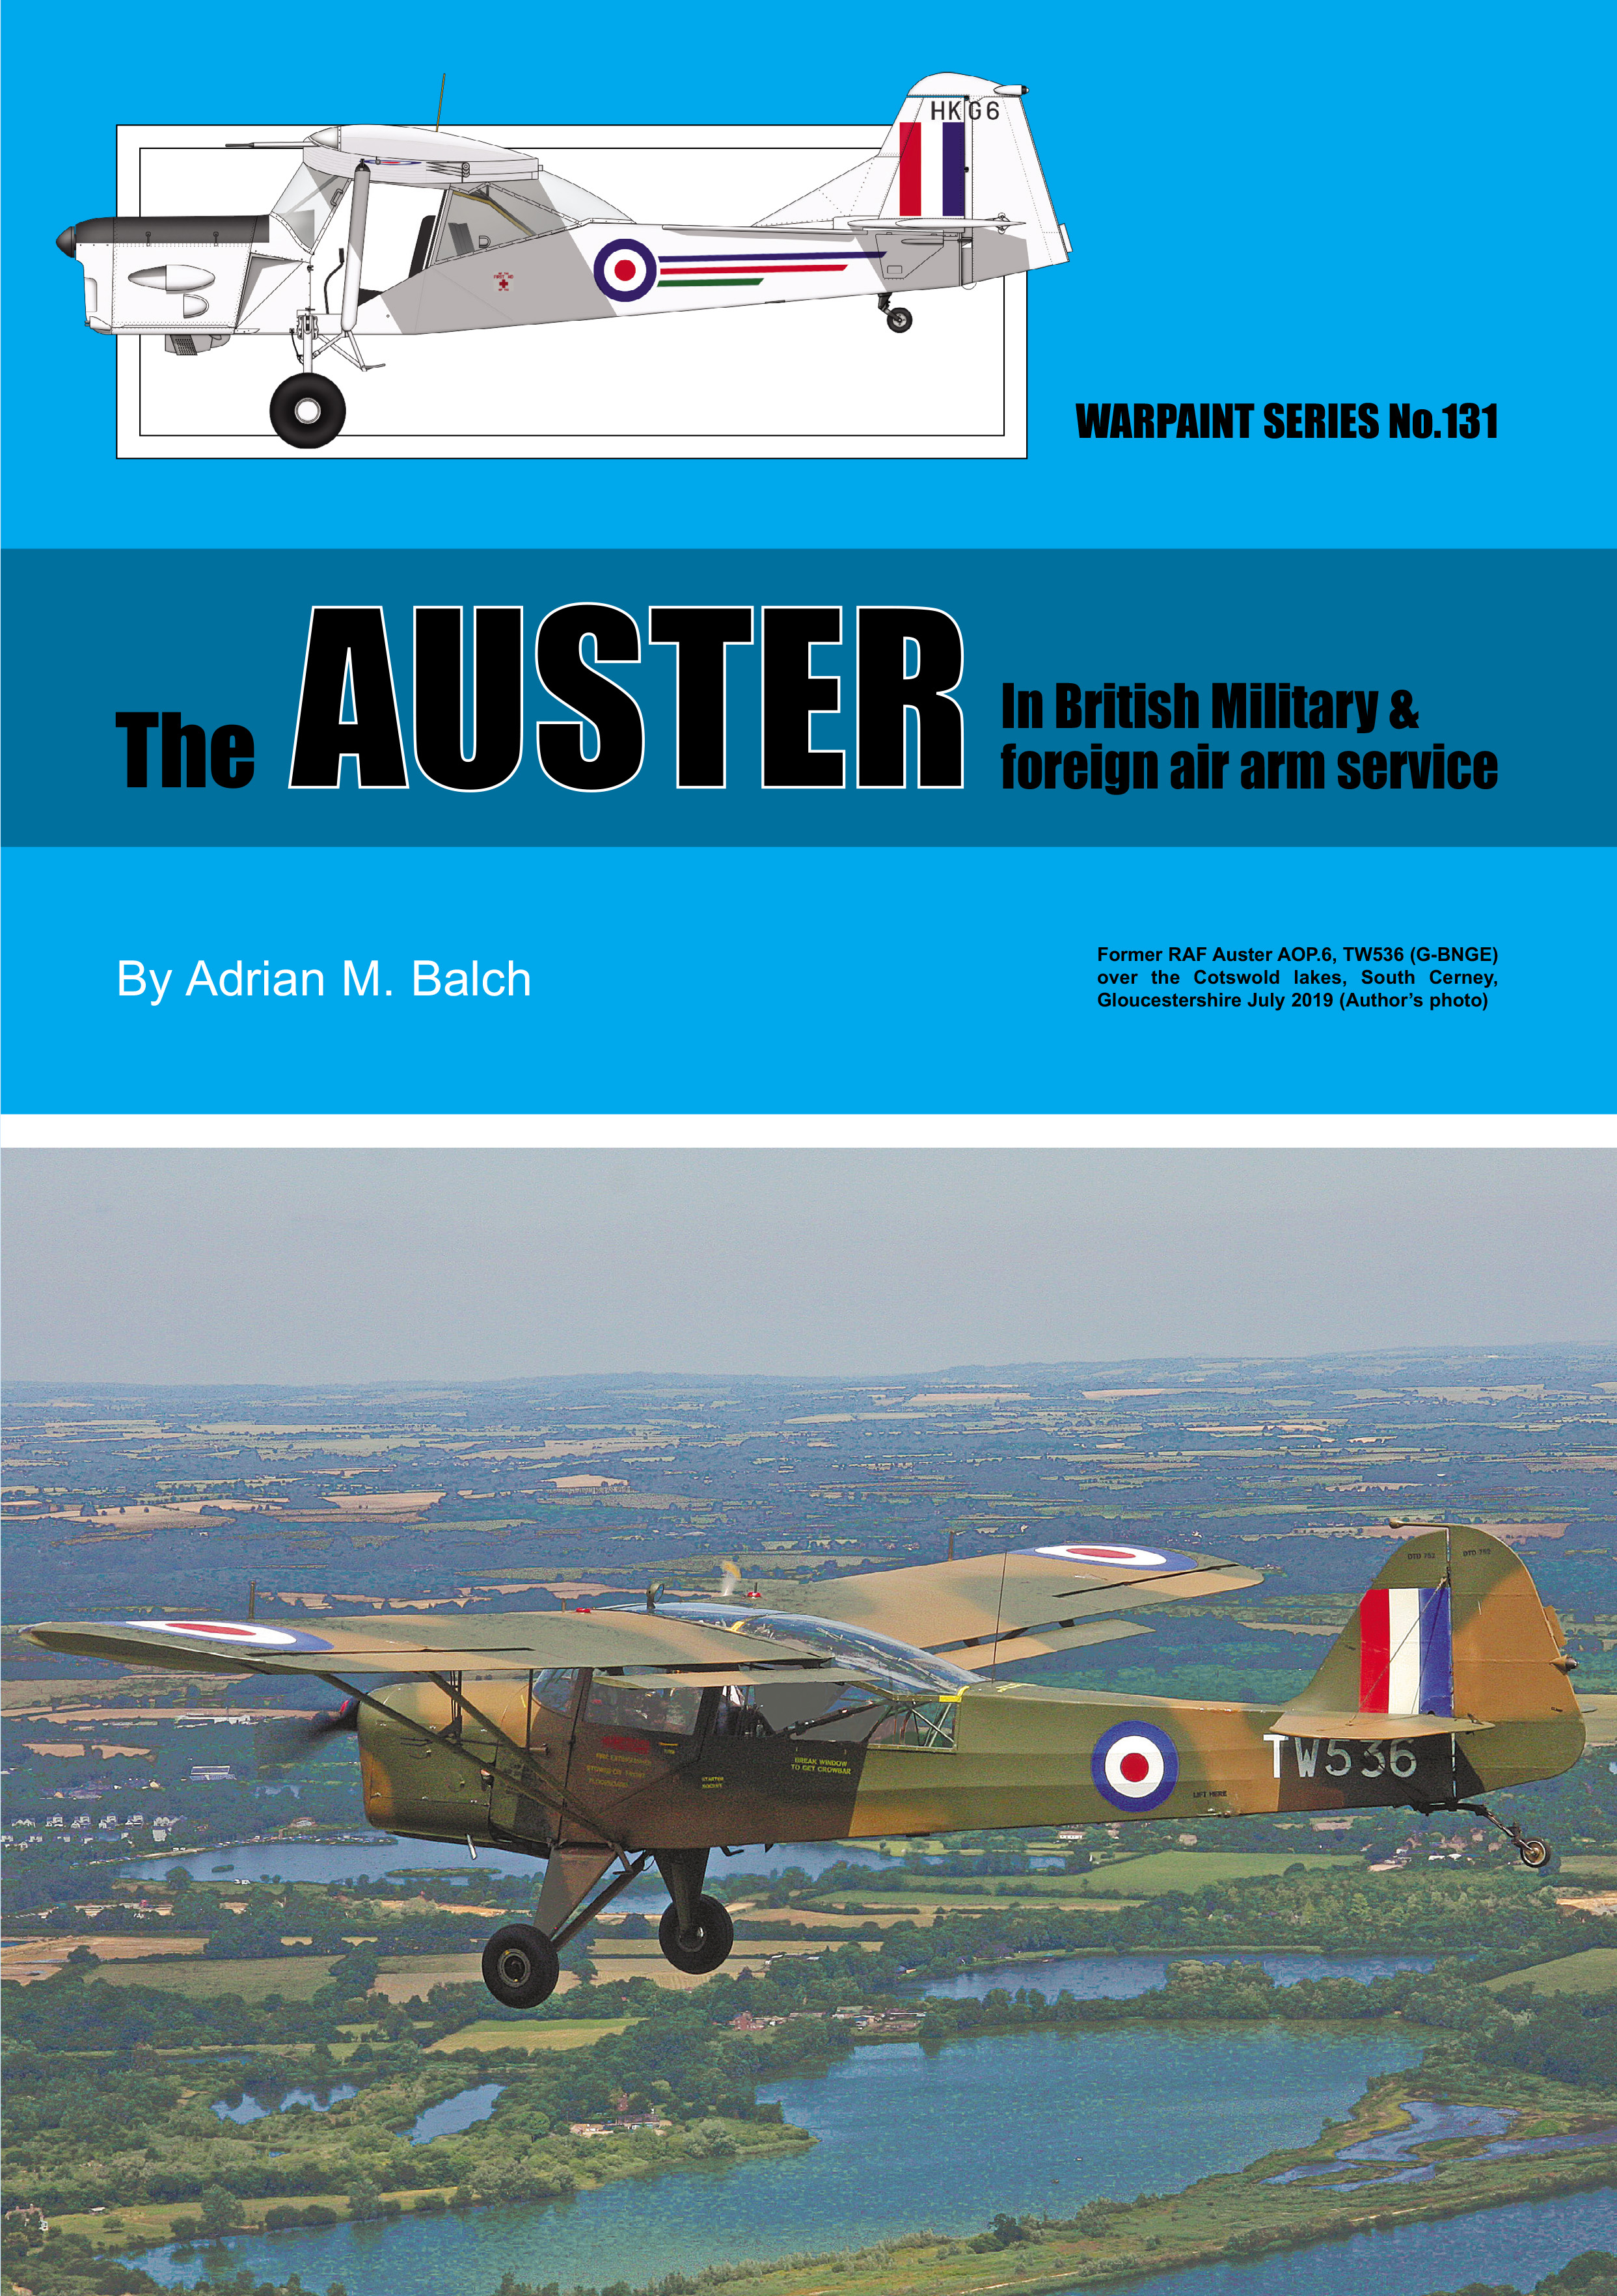 Guideline Publications Ltd Warpaint 131 The AUSTER In British & foreign air arm service 